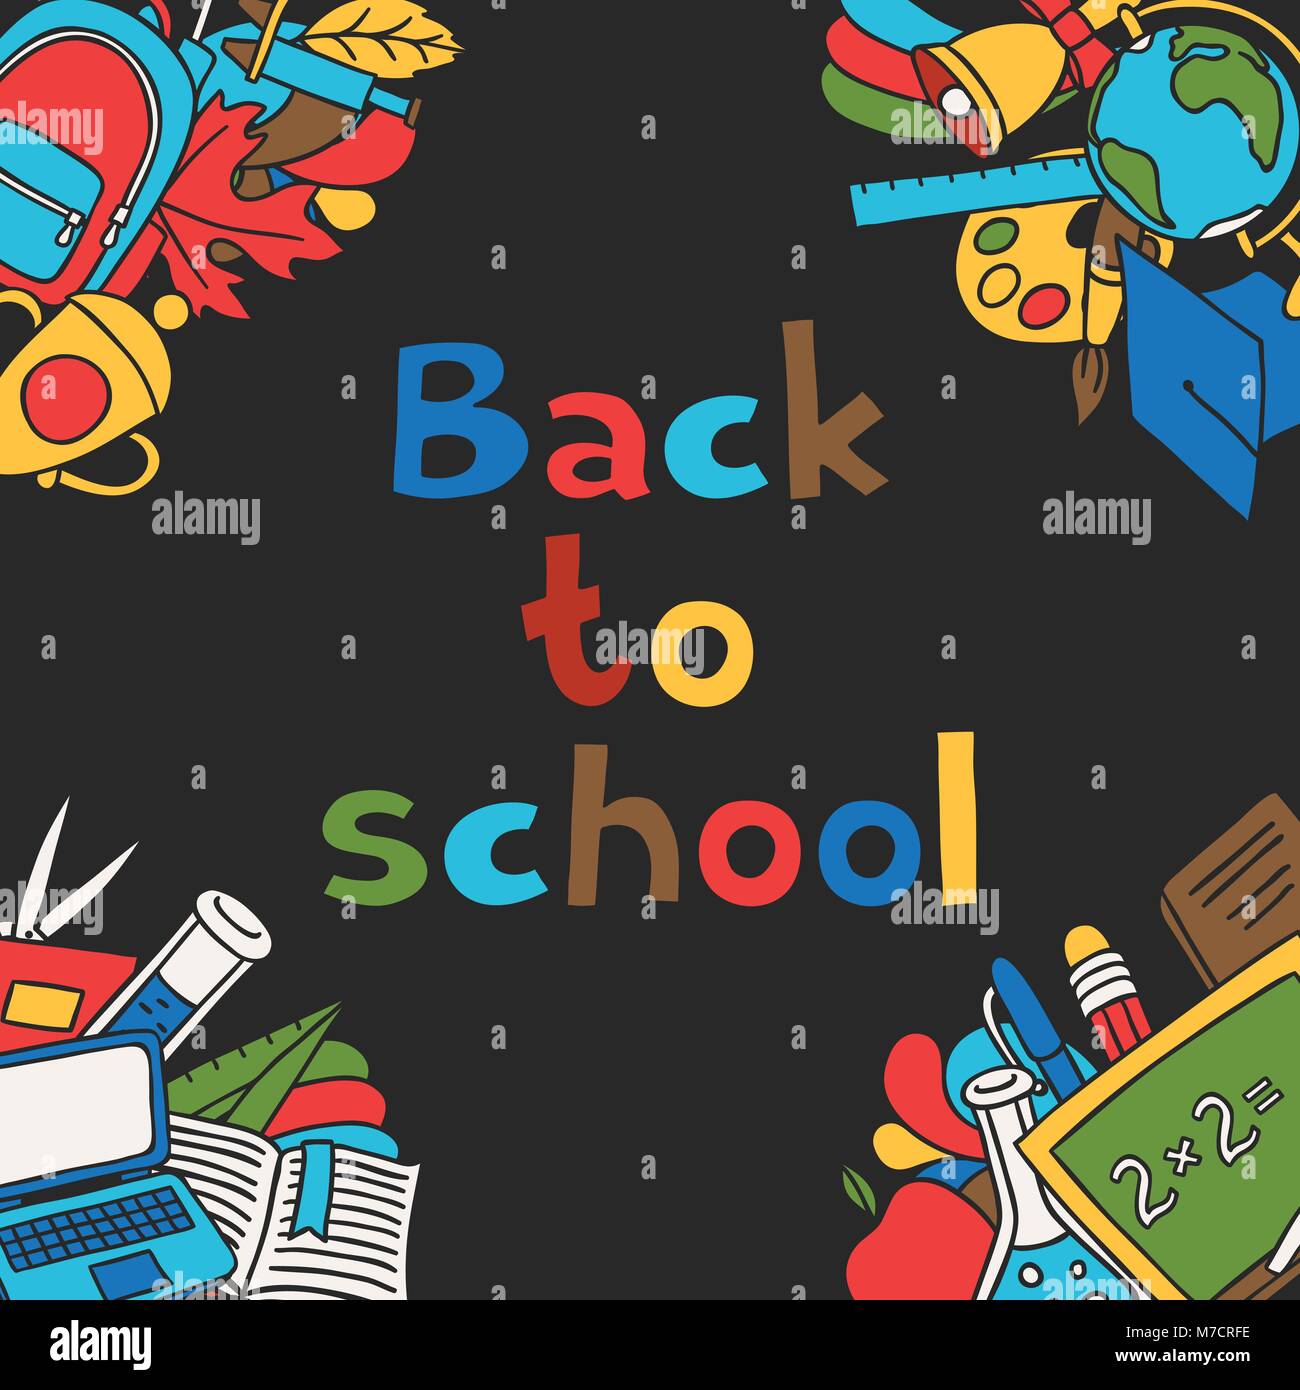 Back to school background with education hand drawn doodles Stock Vector